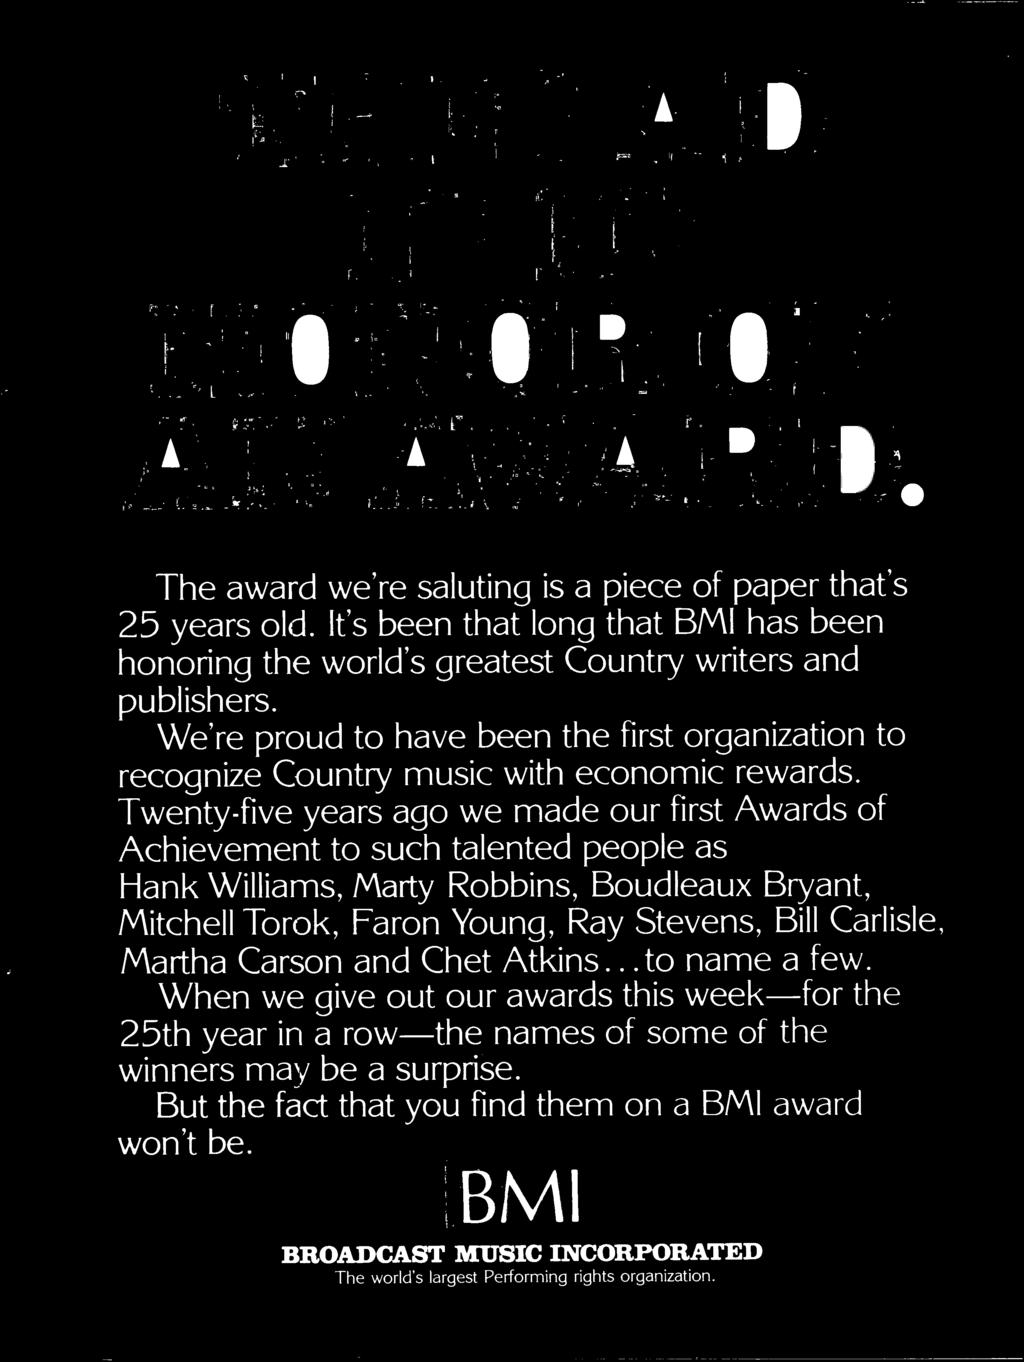 Twenty-five years ago we made our first Awards of Achievement to such talented people as Hank Williams, Marty Robbins, Boudleaux Bryant, Mitchell Torok, Faron Young, Ray Stevens, Bill Carlisle,